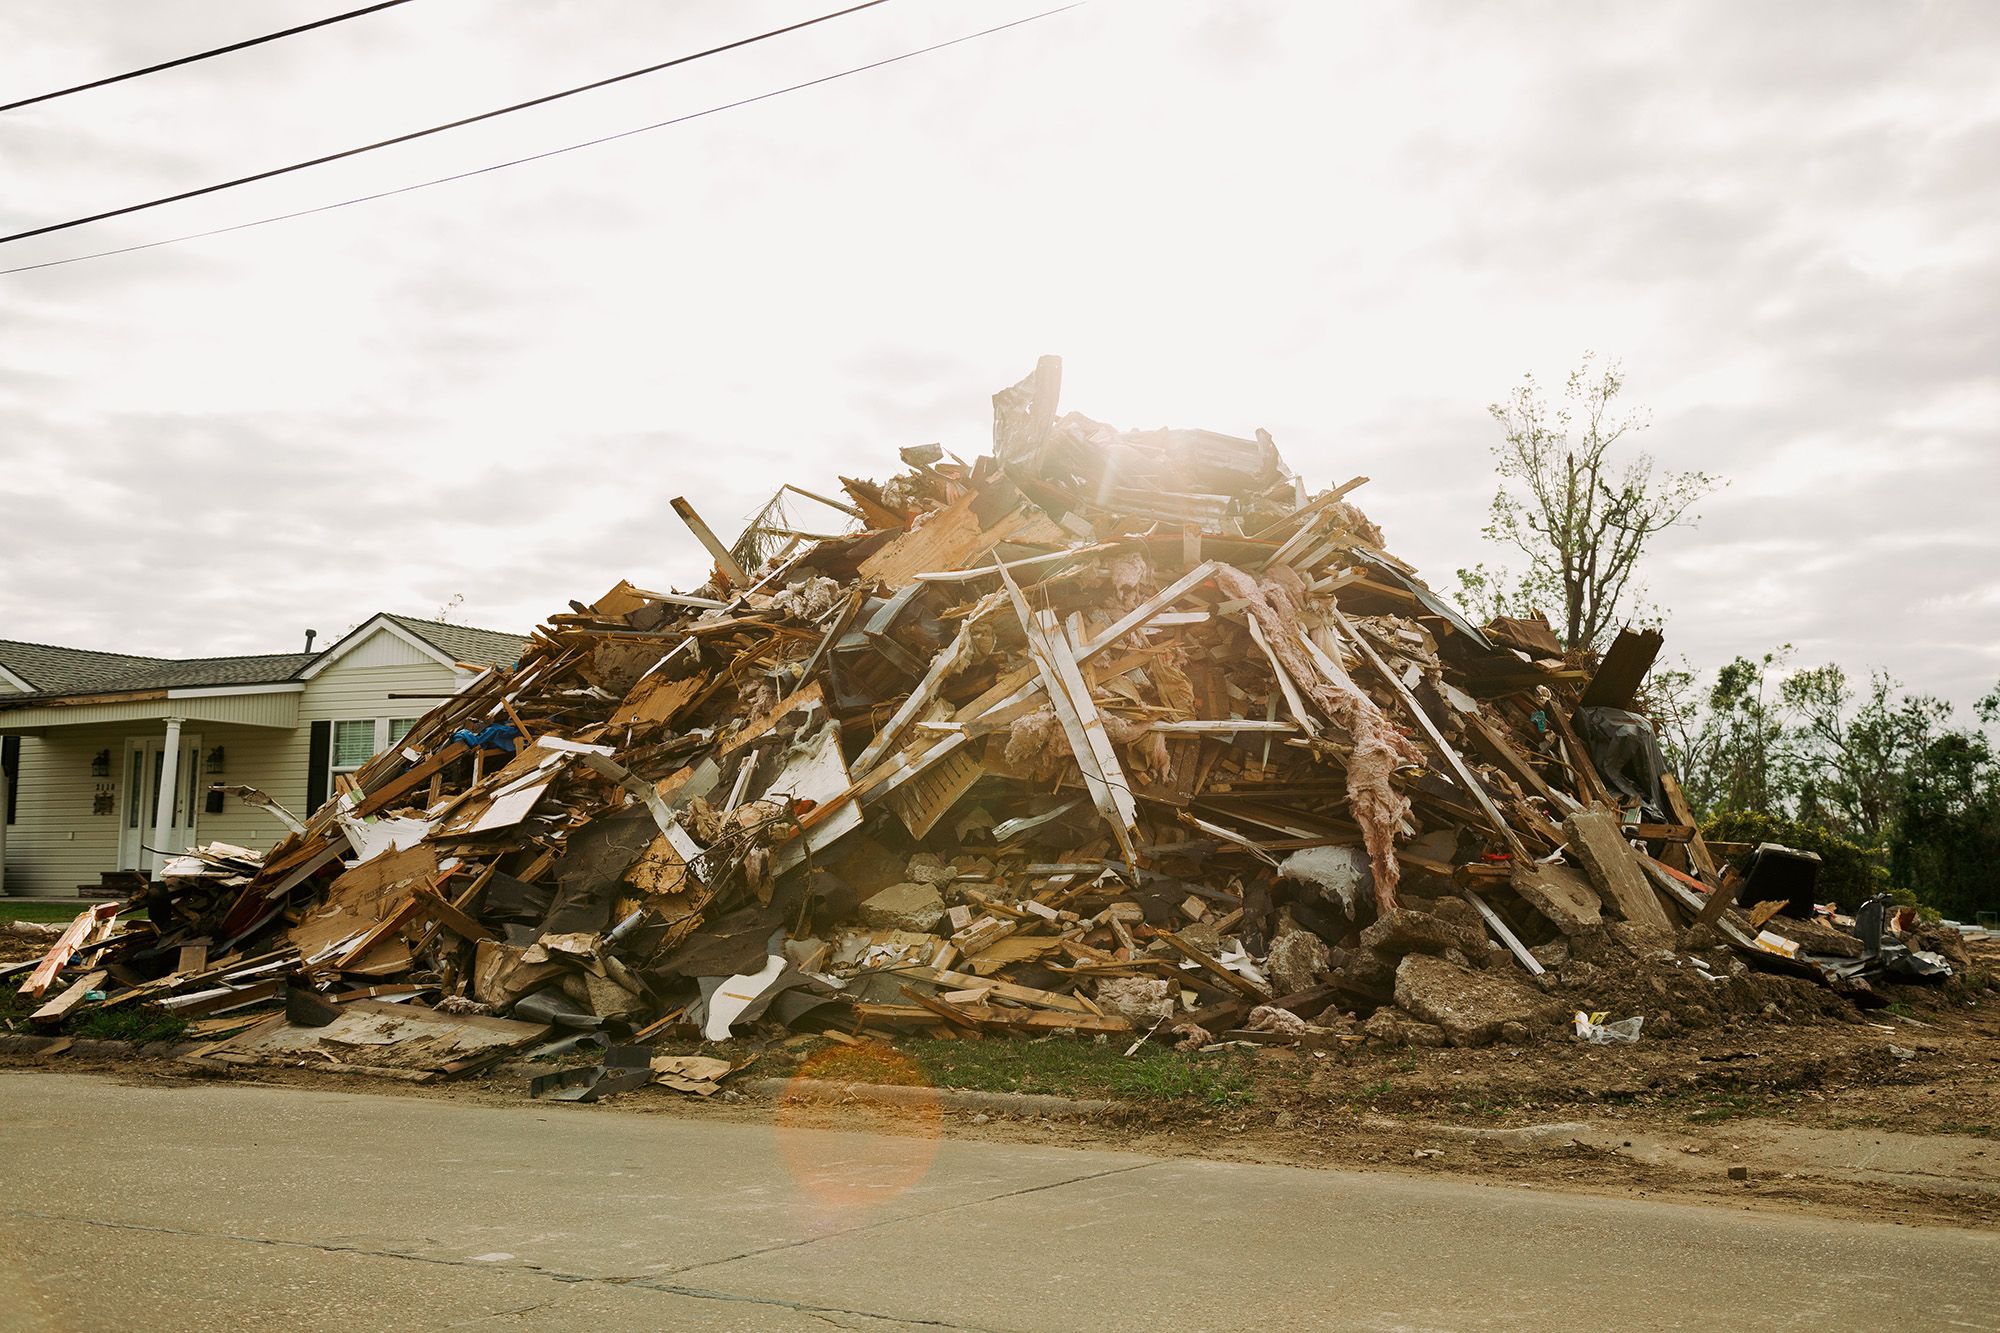 An entire house was leveled and reduced to a pile of debris in Lake Charles, La. 